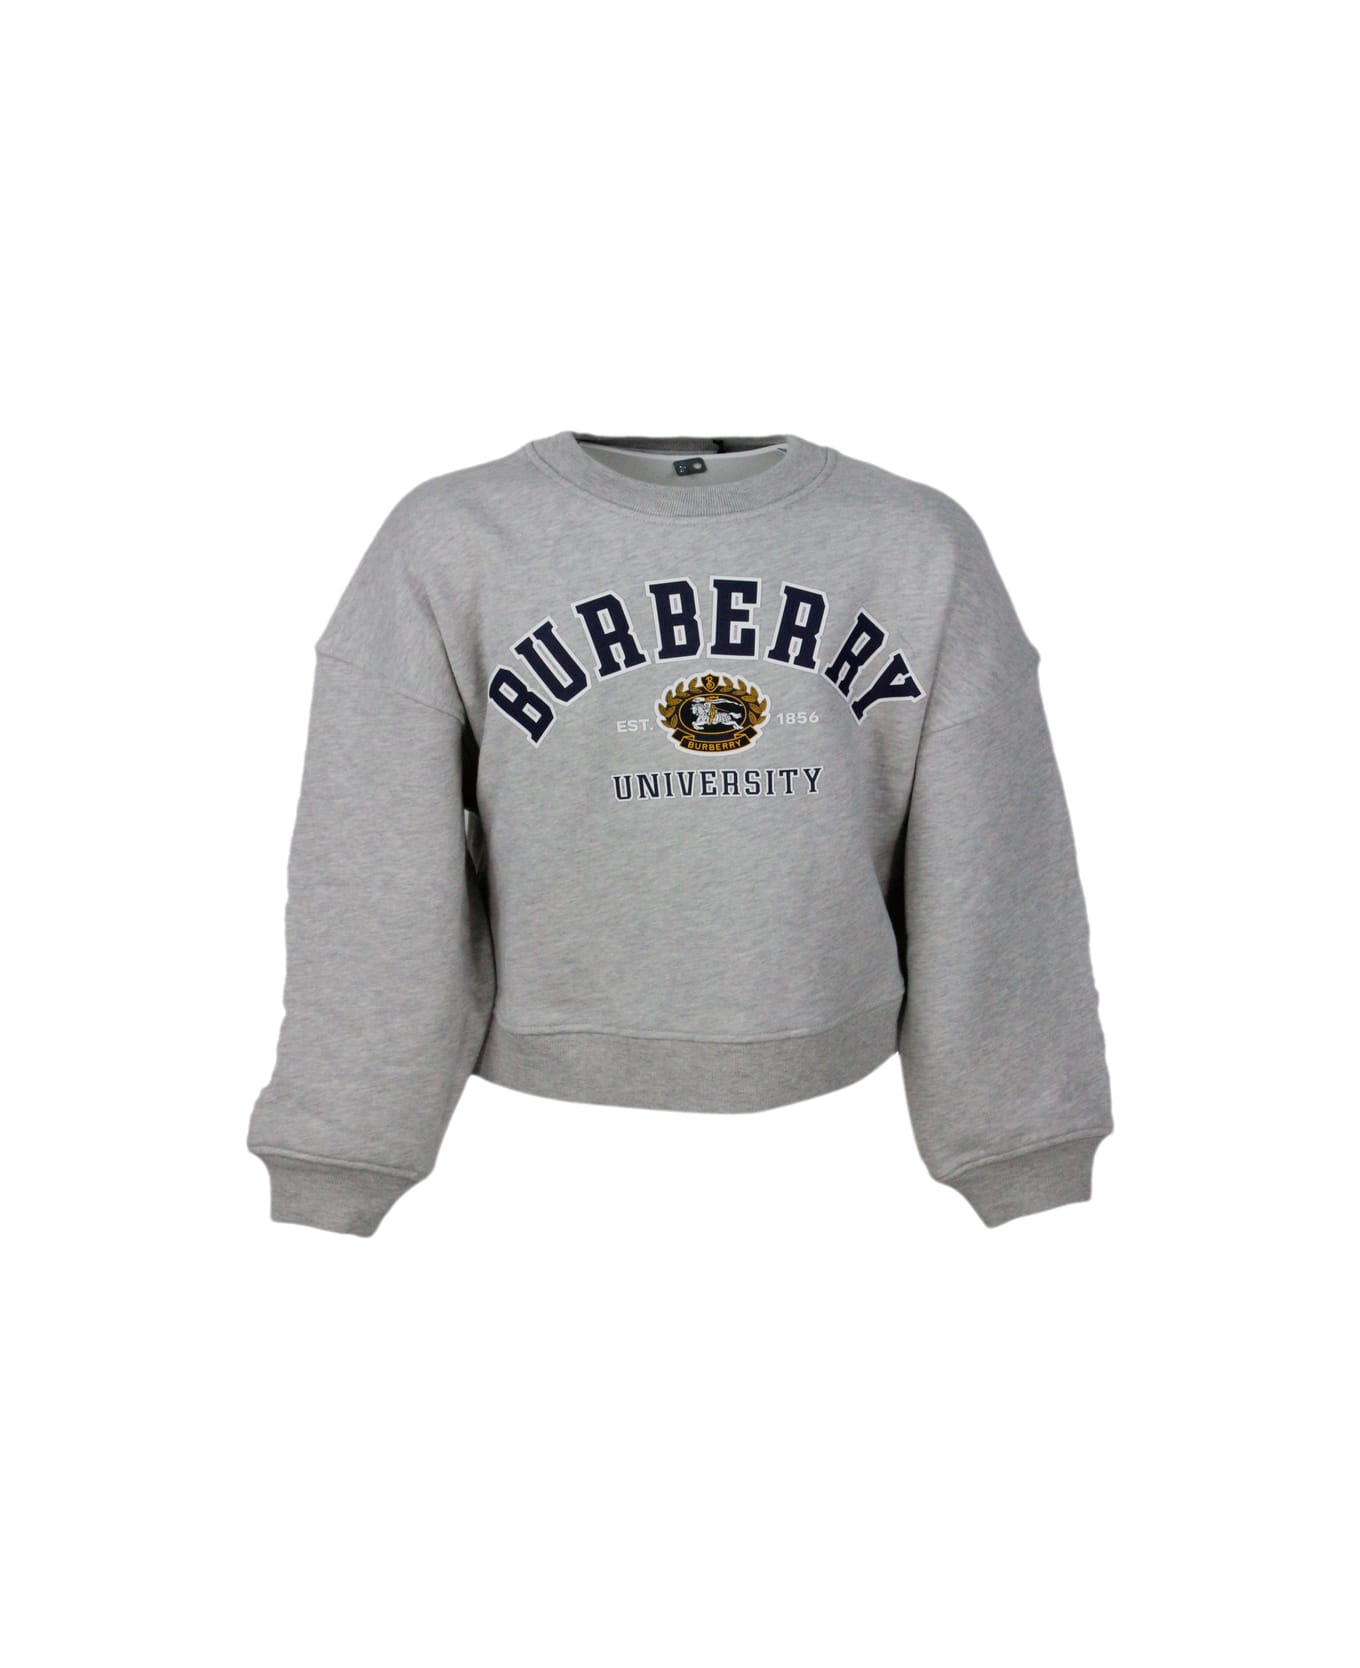 Burberry Crewneck Sweatshirt In Cotton Jersey With Logo Print And University Writing On The Front - Grey